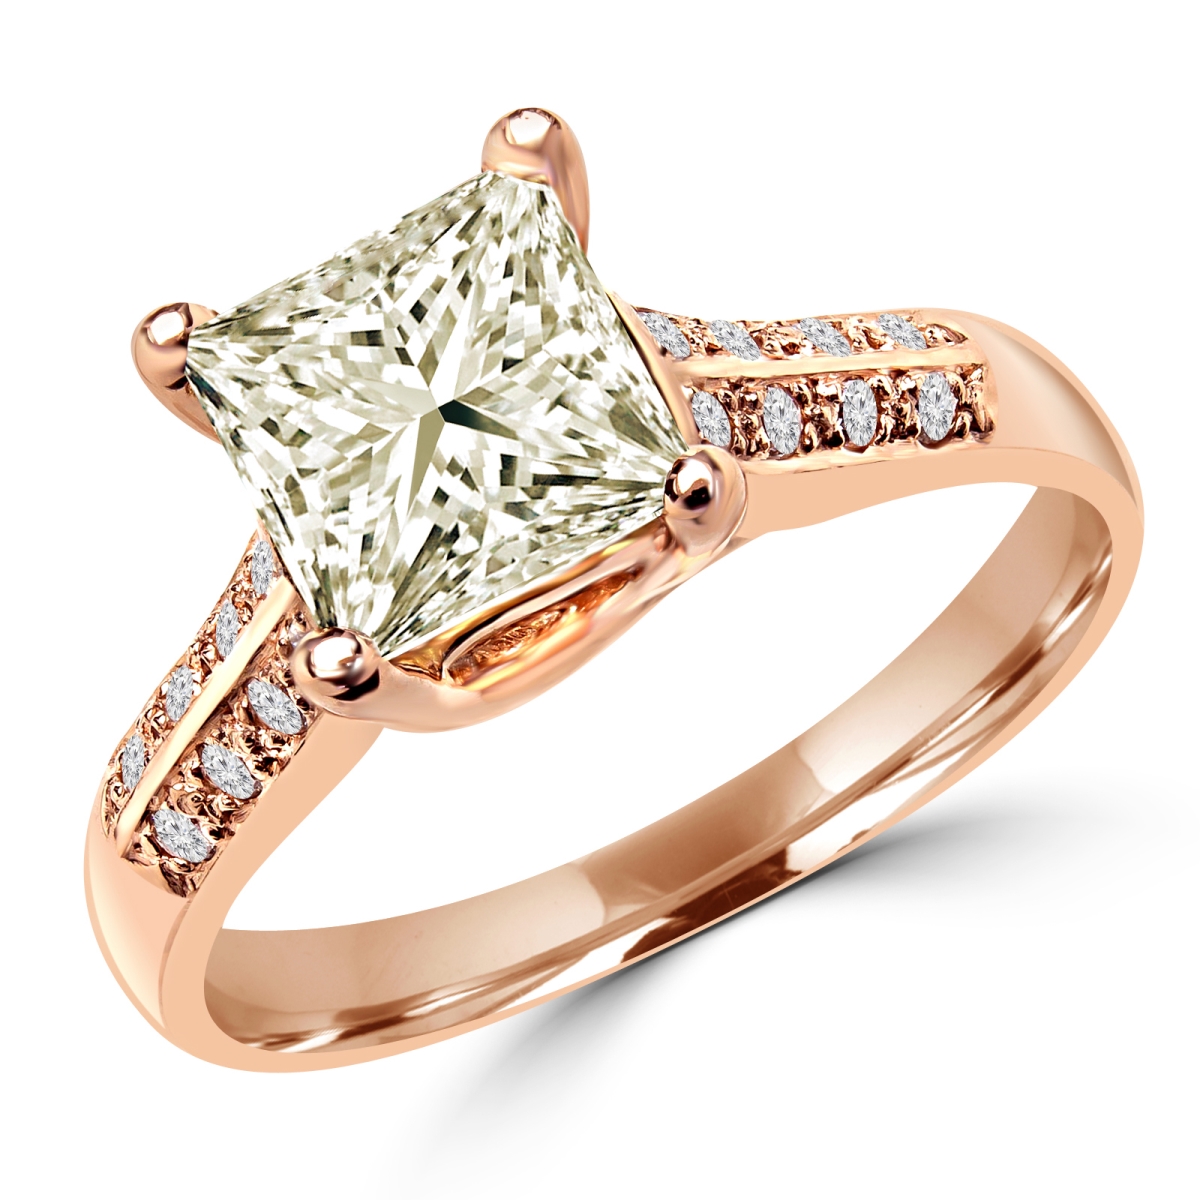 Md150120-p 1.1 Ctw Yellow Radiant Cut Diamond Multi Stone Engagement Ring In 14k Rose Gold